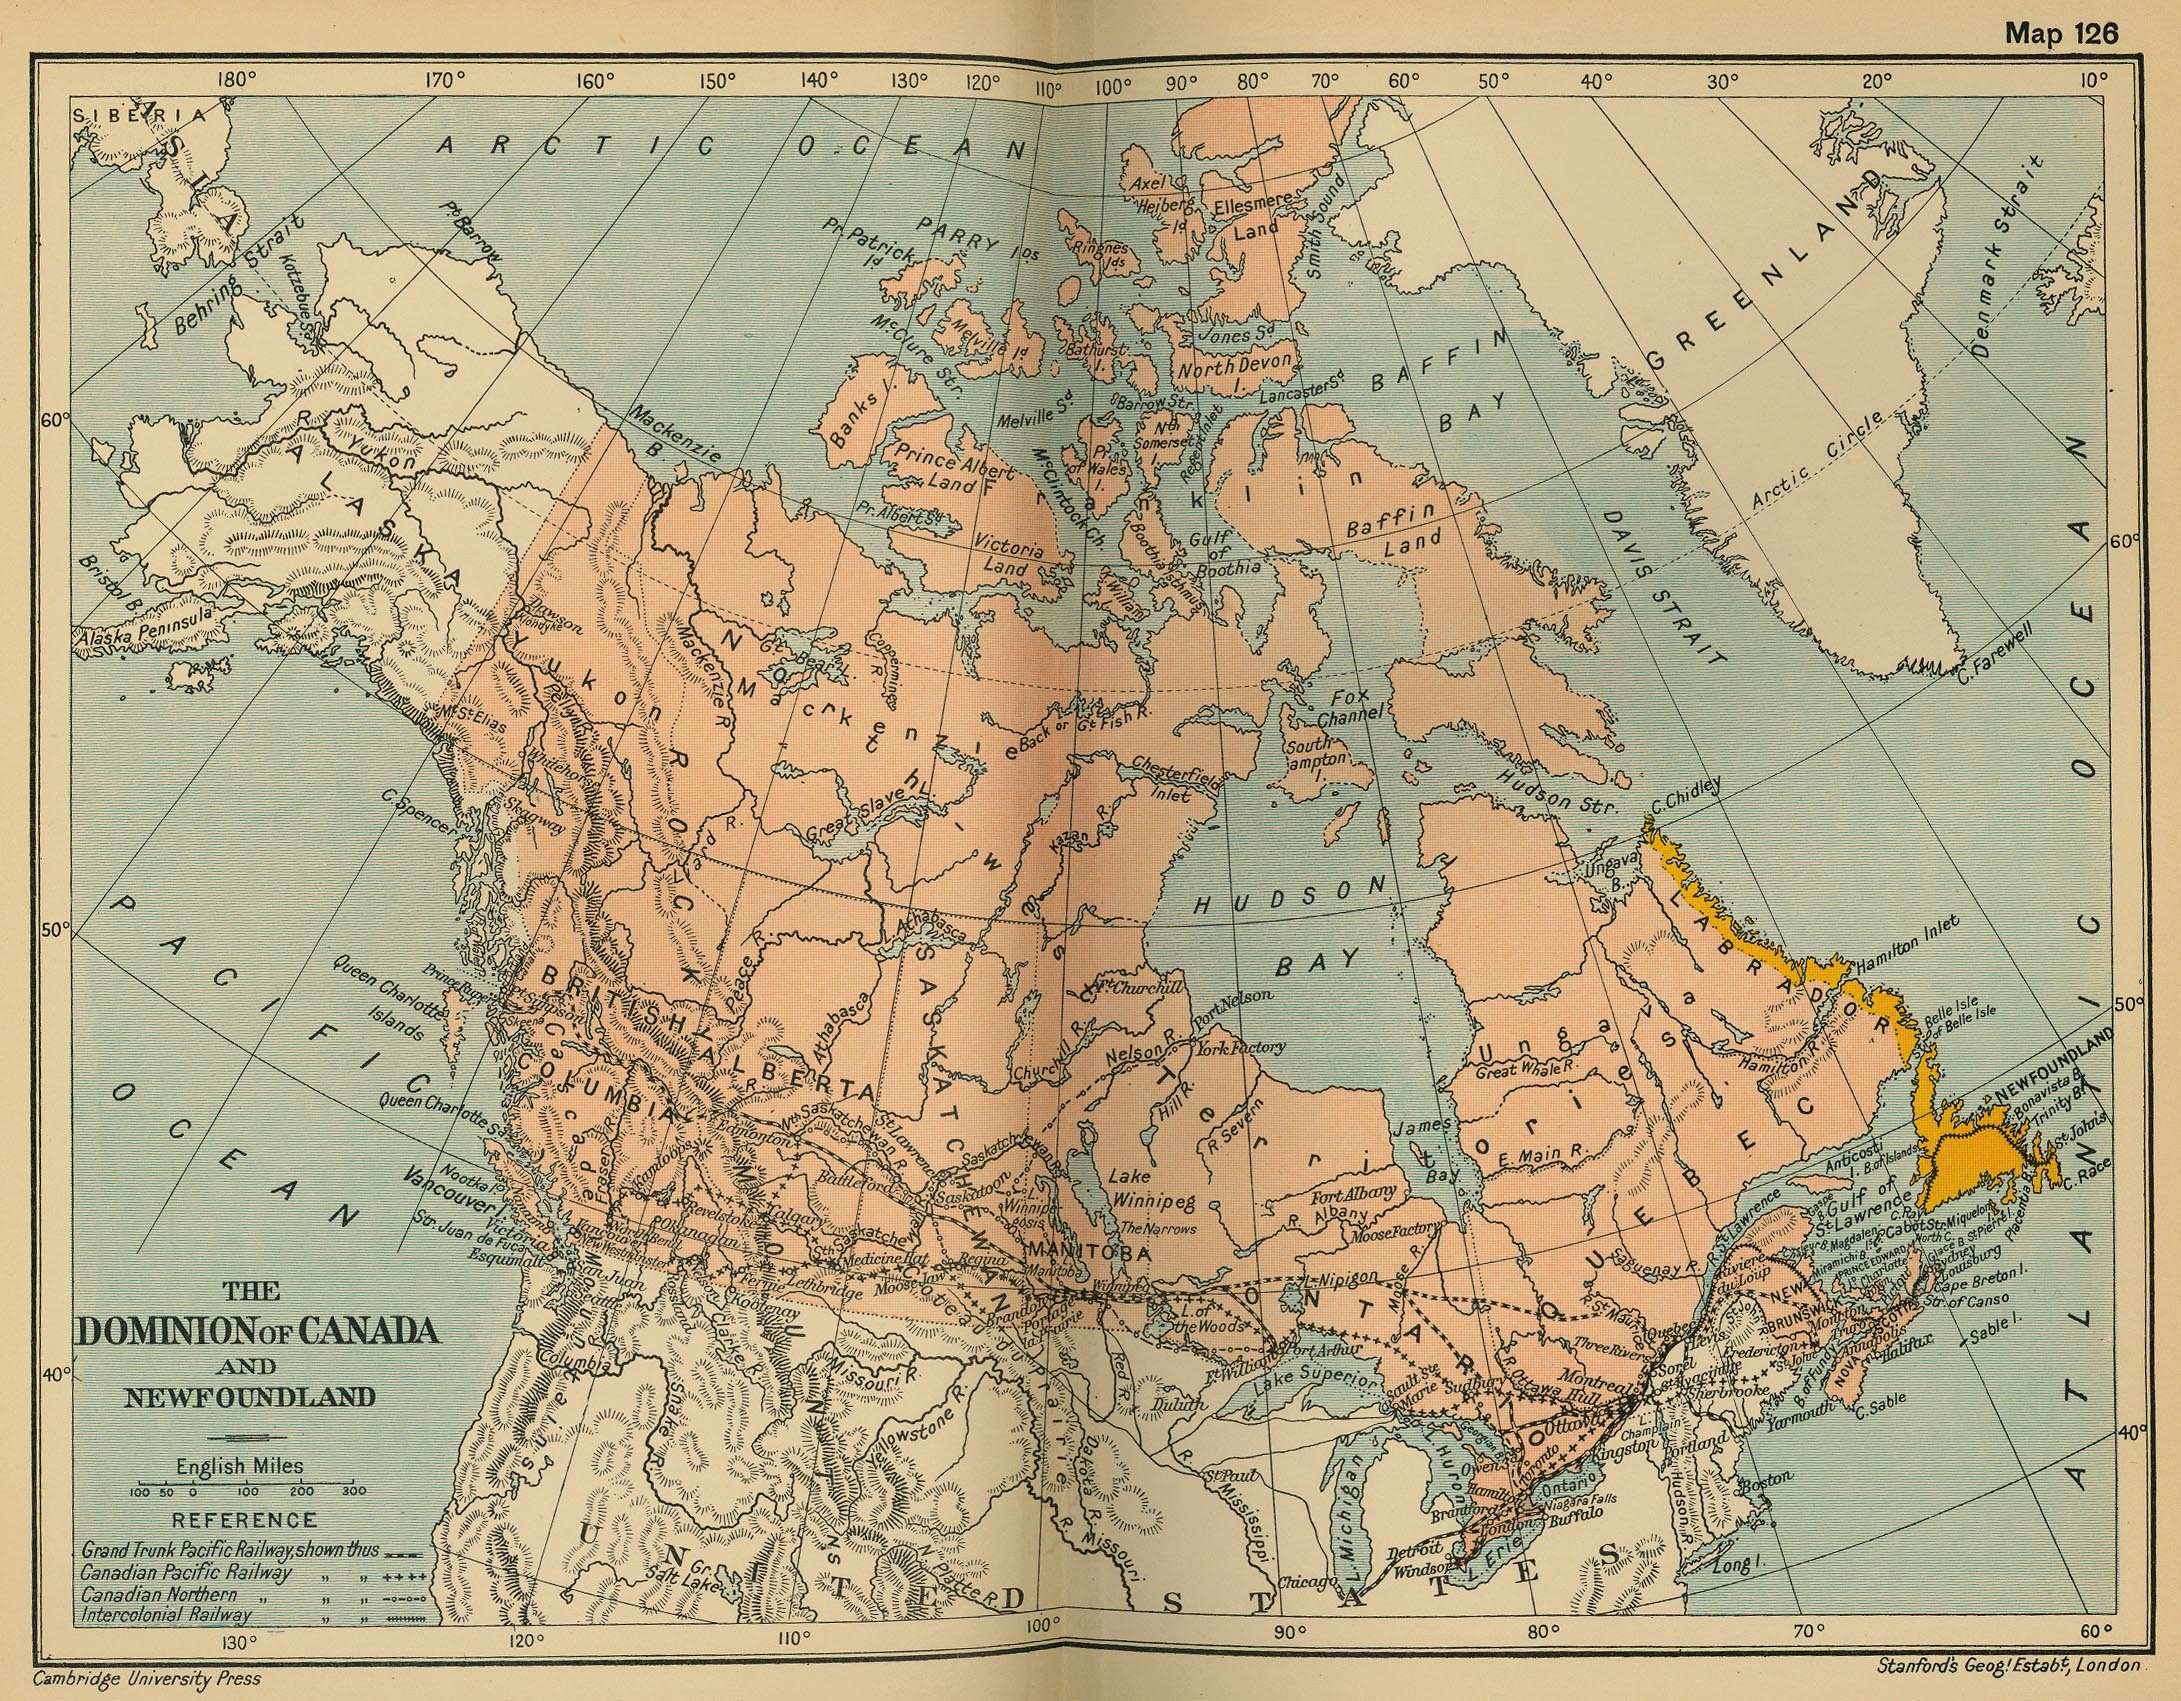 Map of the Dominion of Canada and Newfoundland